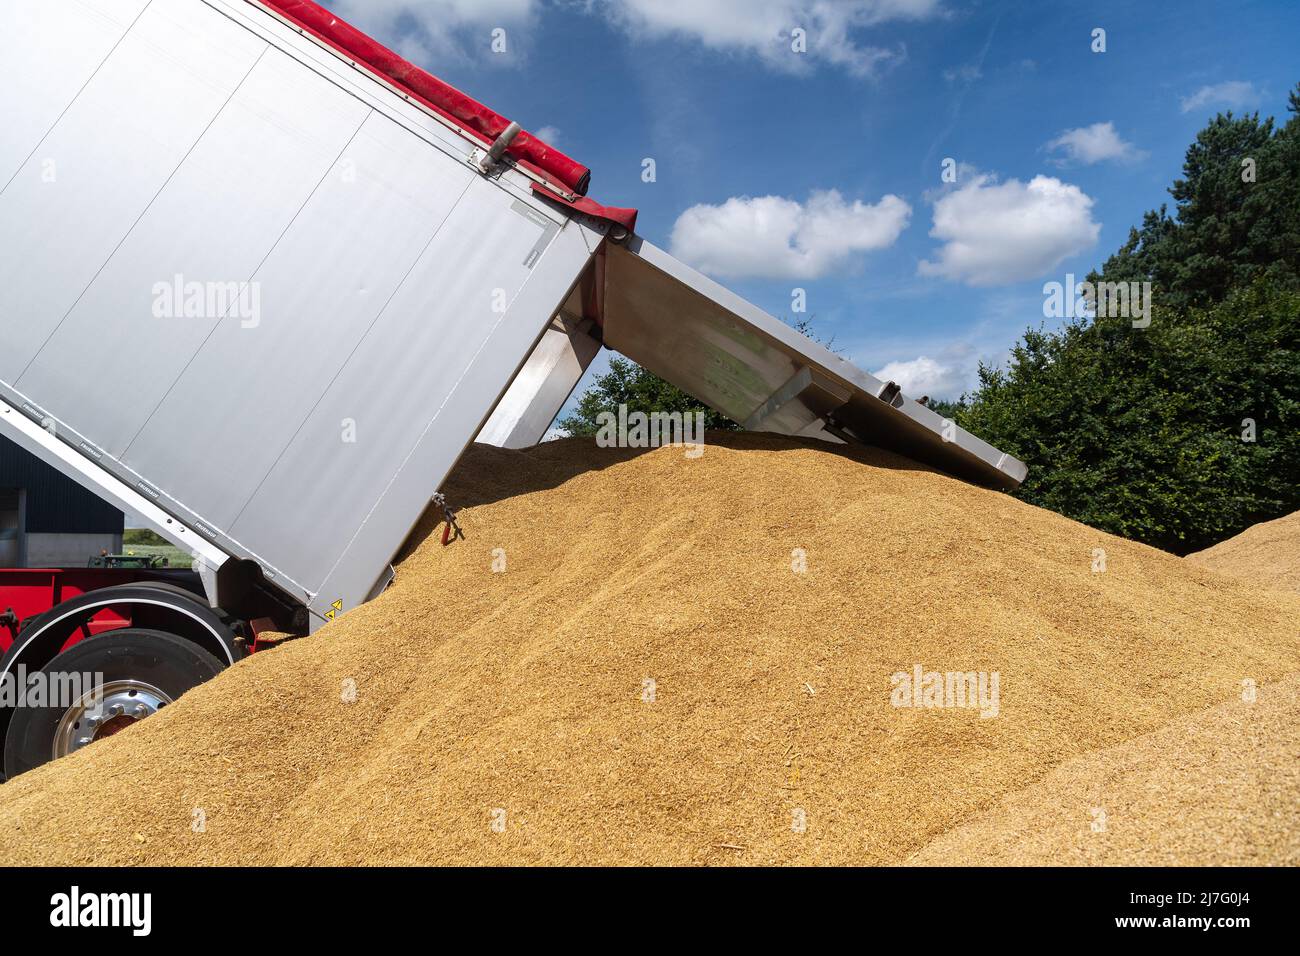 Unloading a load of wheat from an articulated lorry trailer at a grain merchants, Durham, UK, Stock Photo